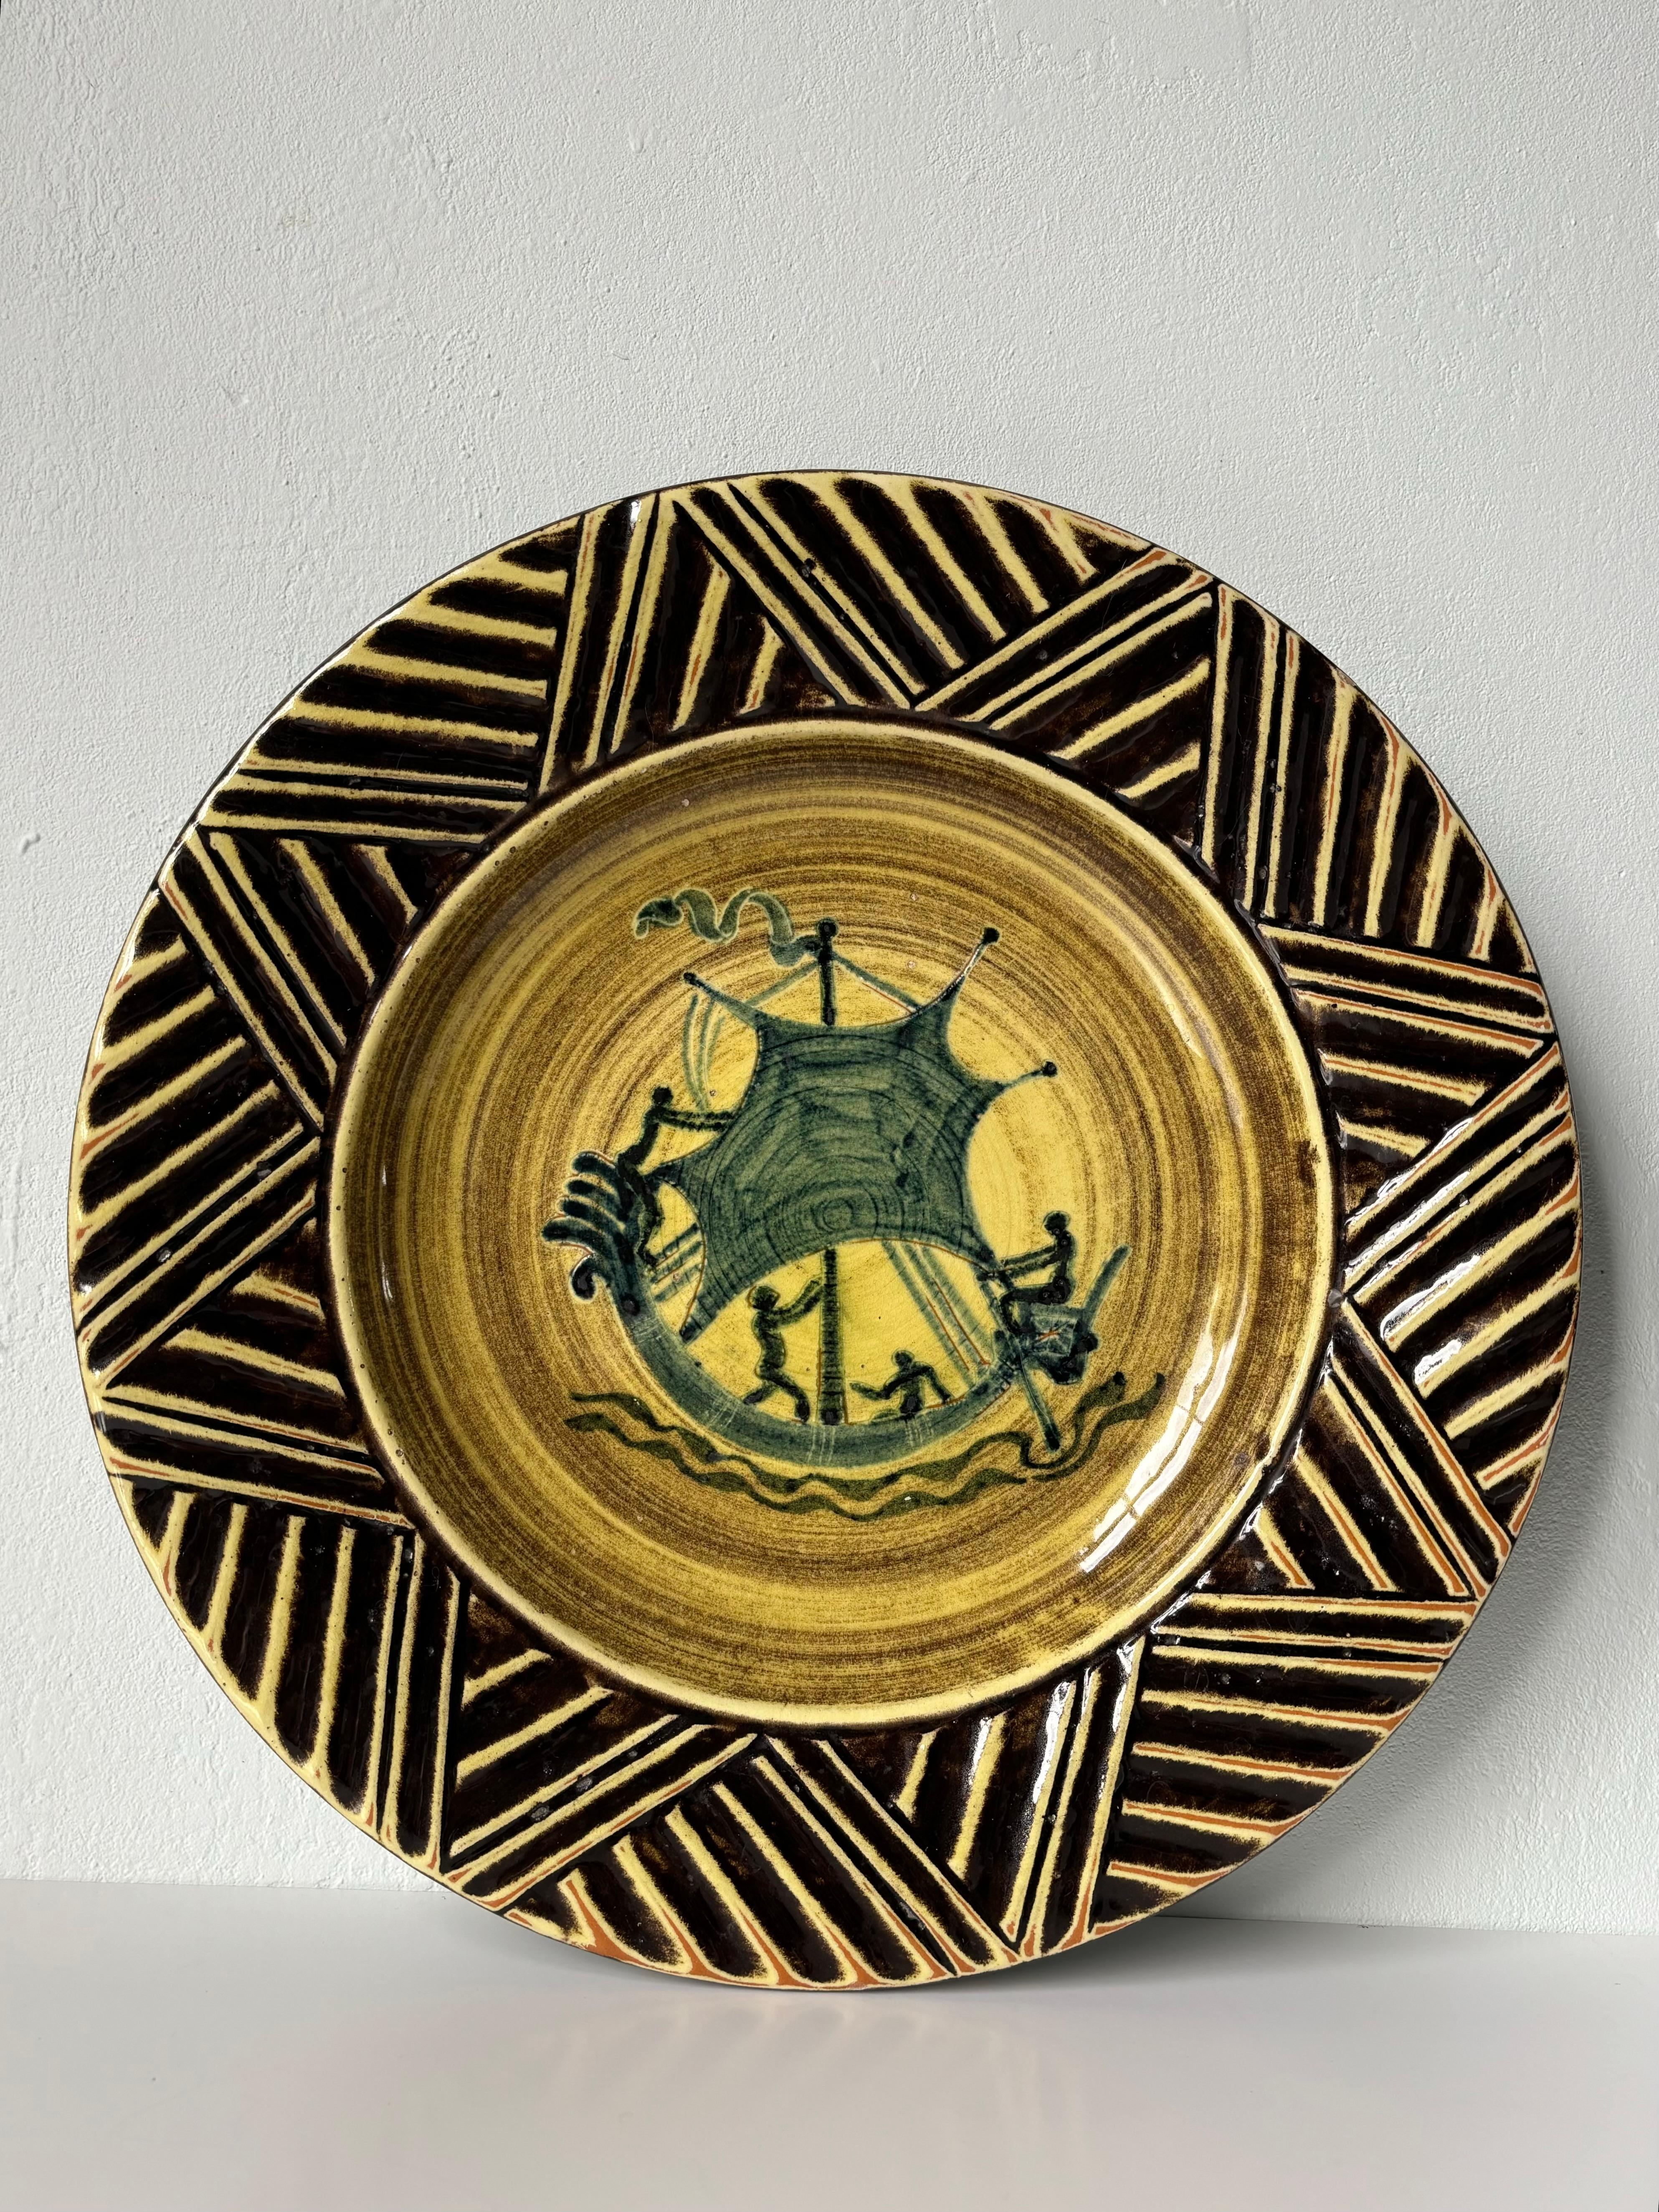 Art Deco earthenware decorative centerpiece bowl handmade by artist Harald Folmer Gross (1888-1961) for Knabstrup Ceramics in the early 1940s - HFG worked for Knabstrup from 1941 to 1945. 
Complex chevron relief pattern creating a star shape around